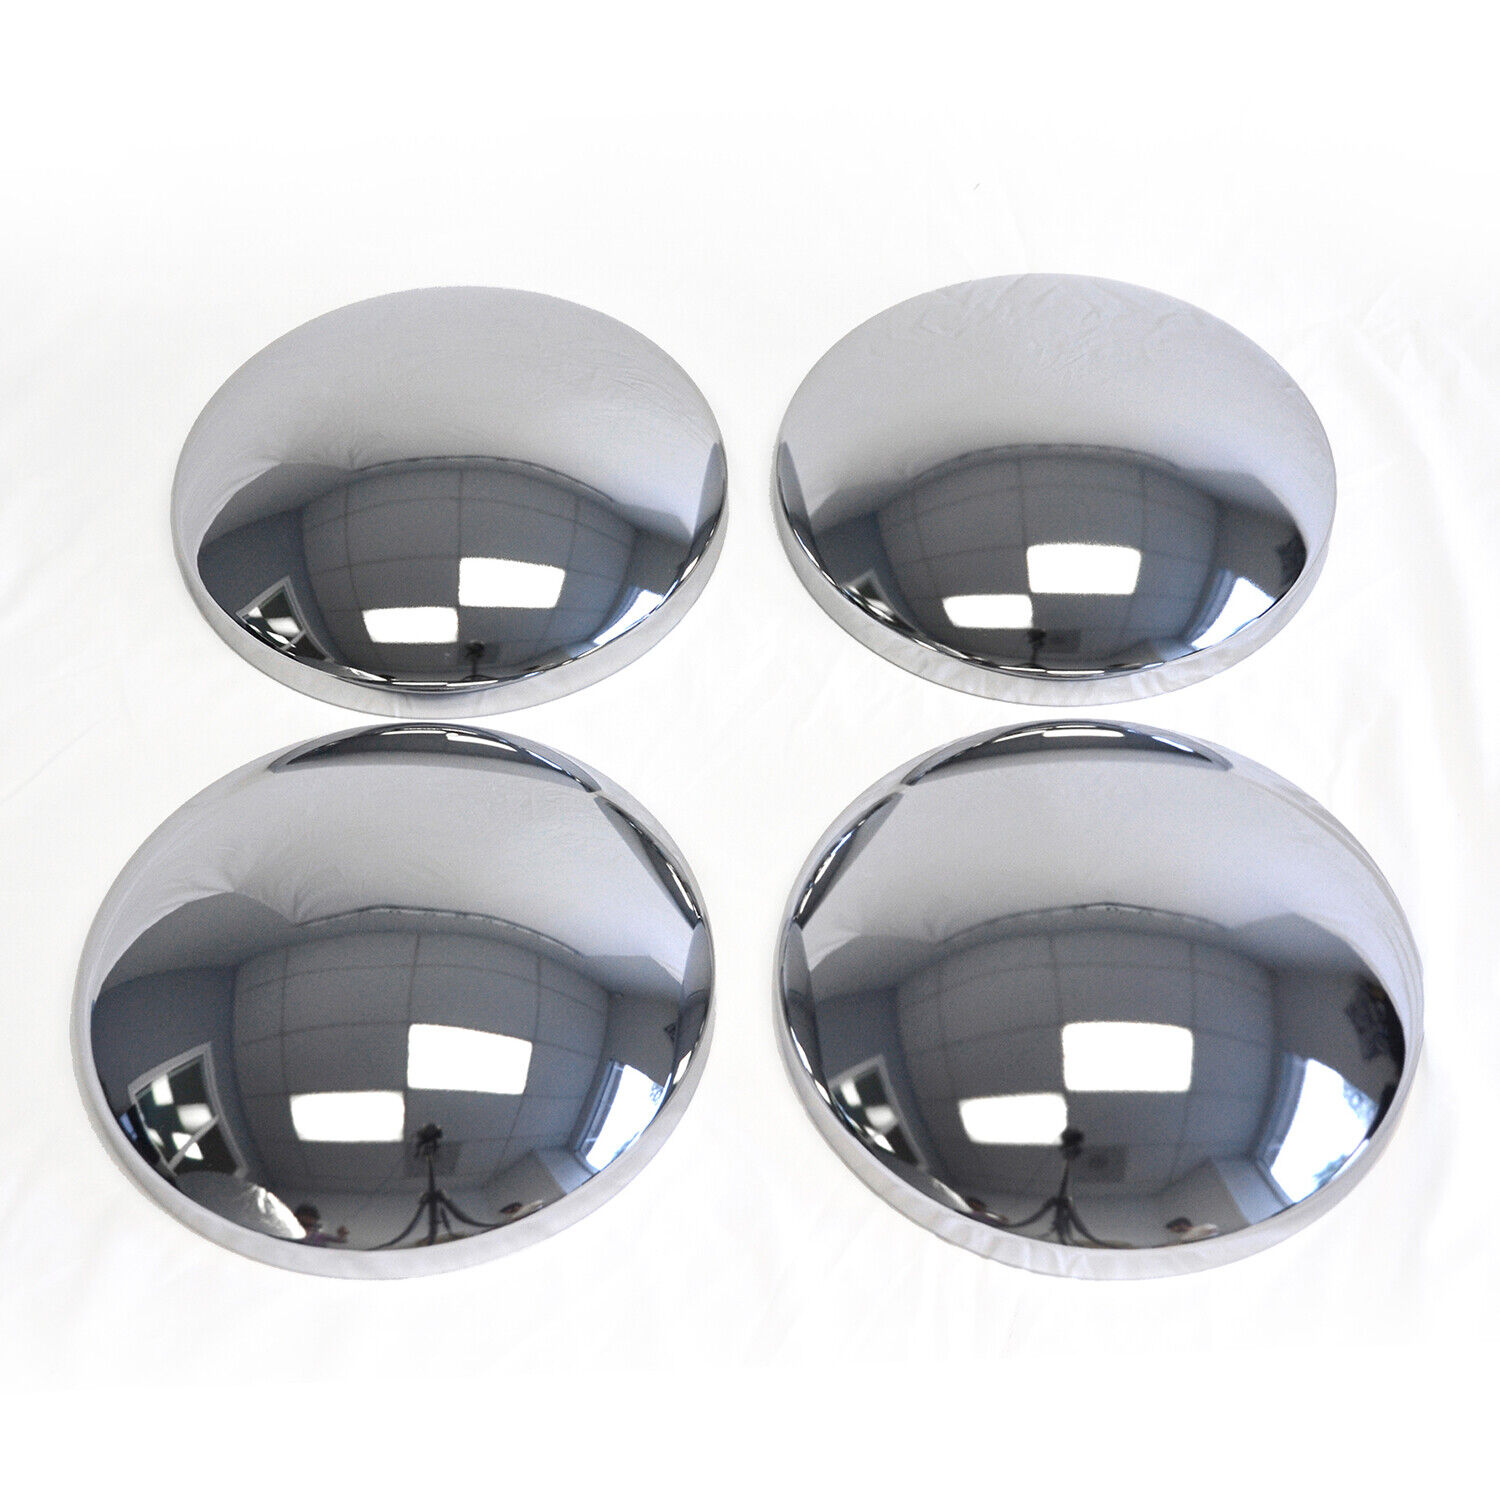 10-1/8 CHROME BABY MOONS Moon Center hubcaps Steel Wheel Cover Hot Rod Smoothie